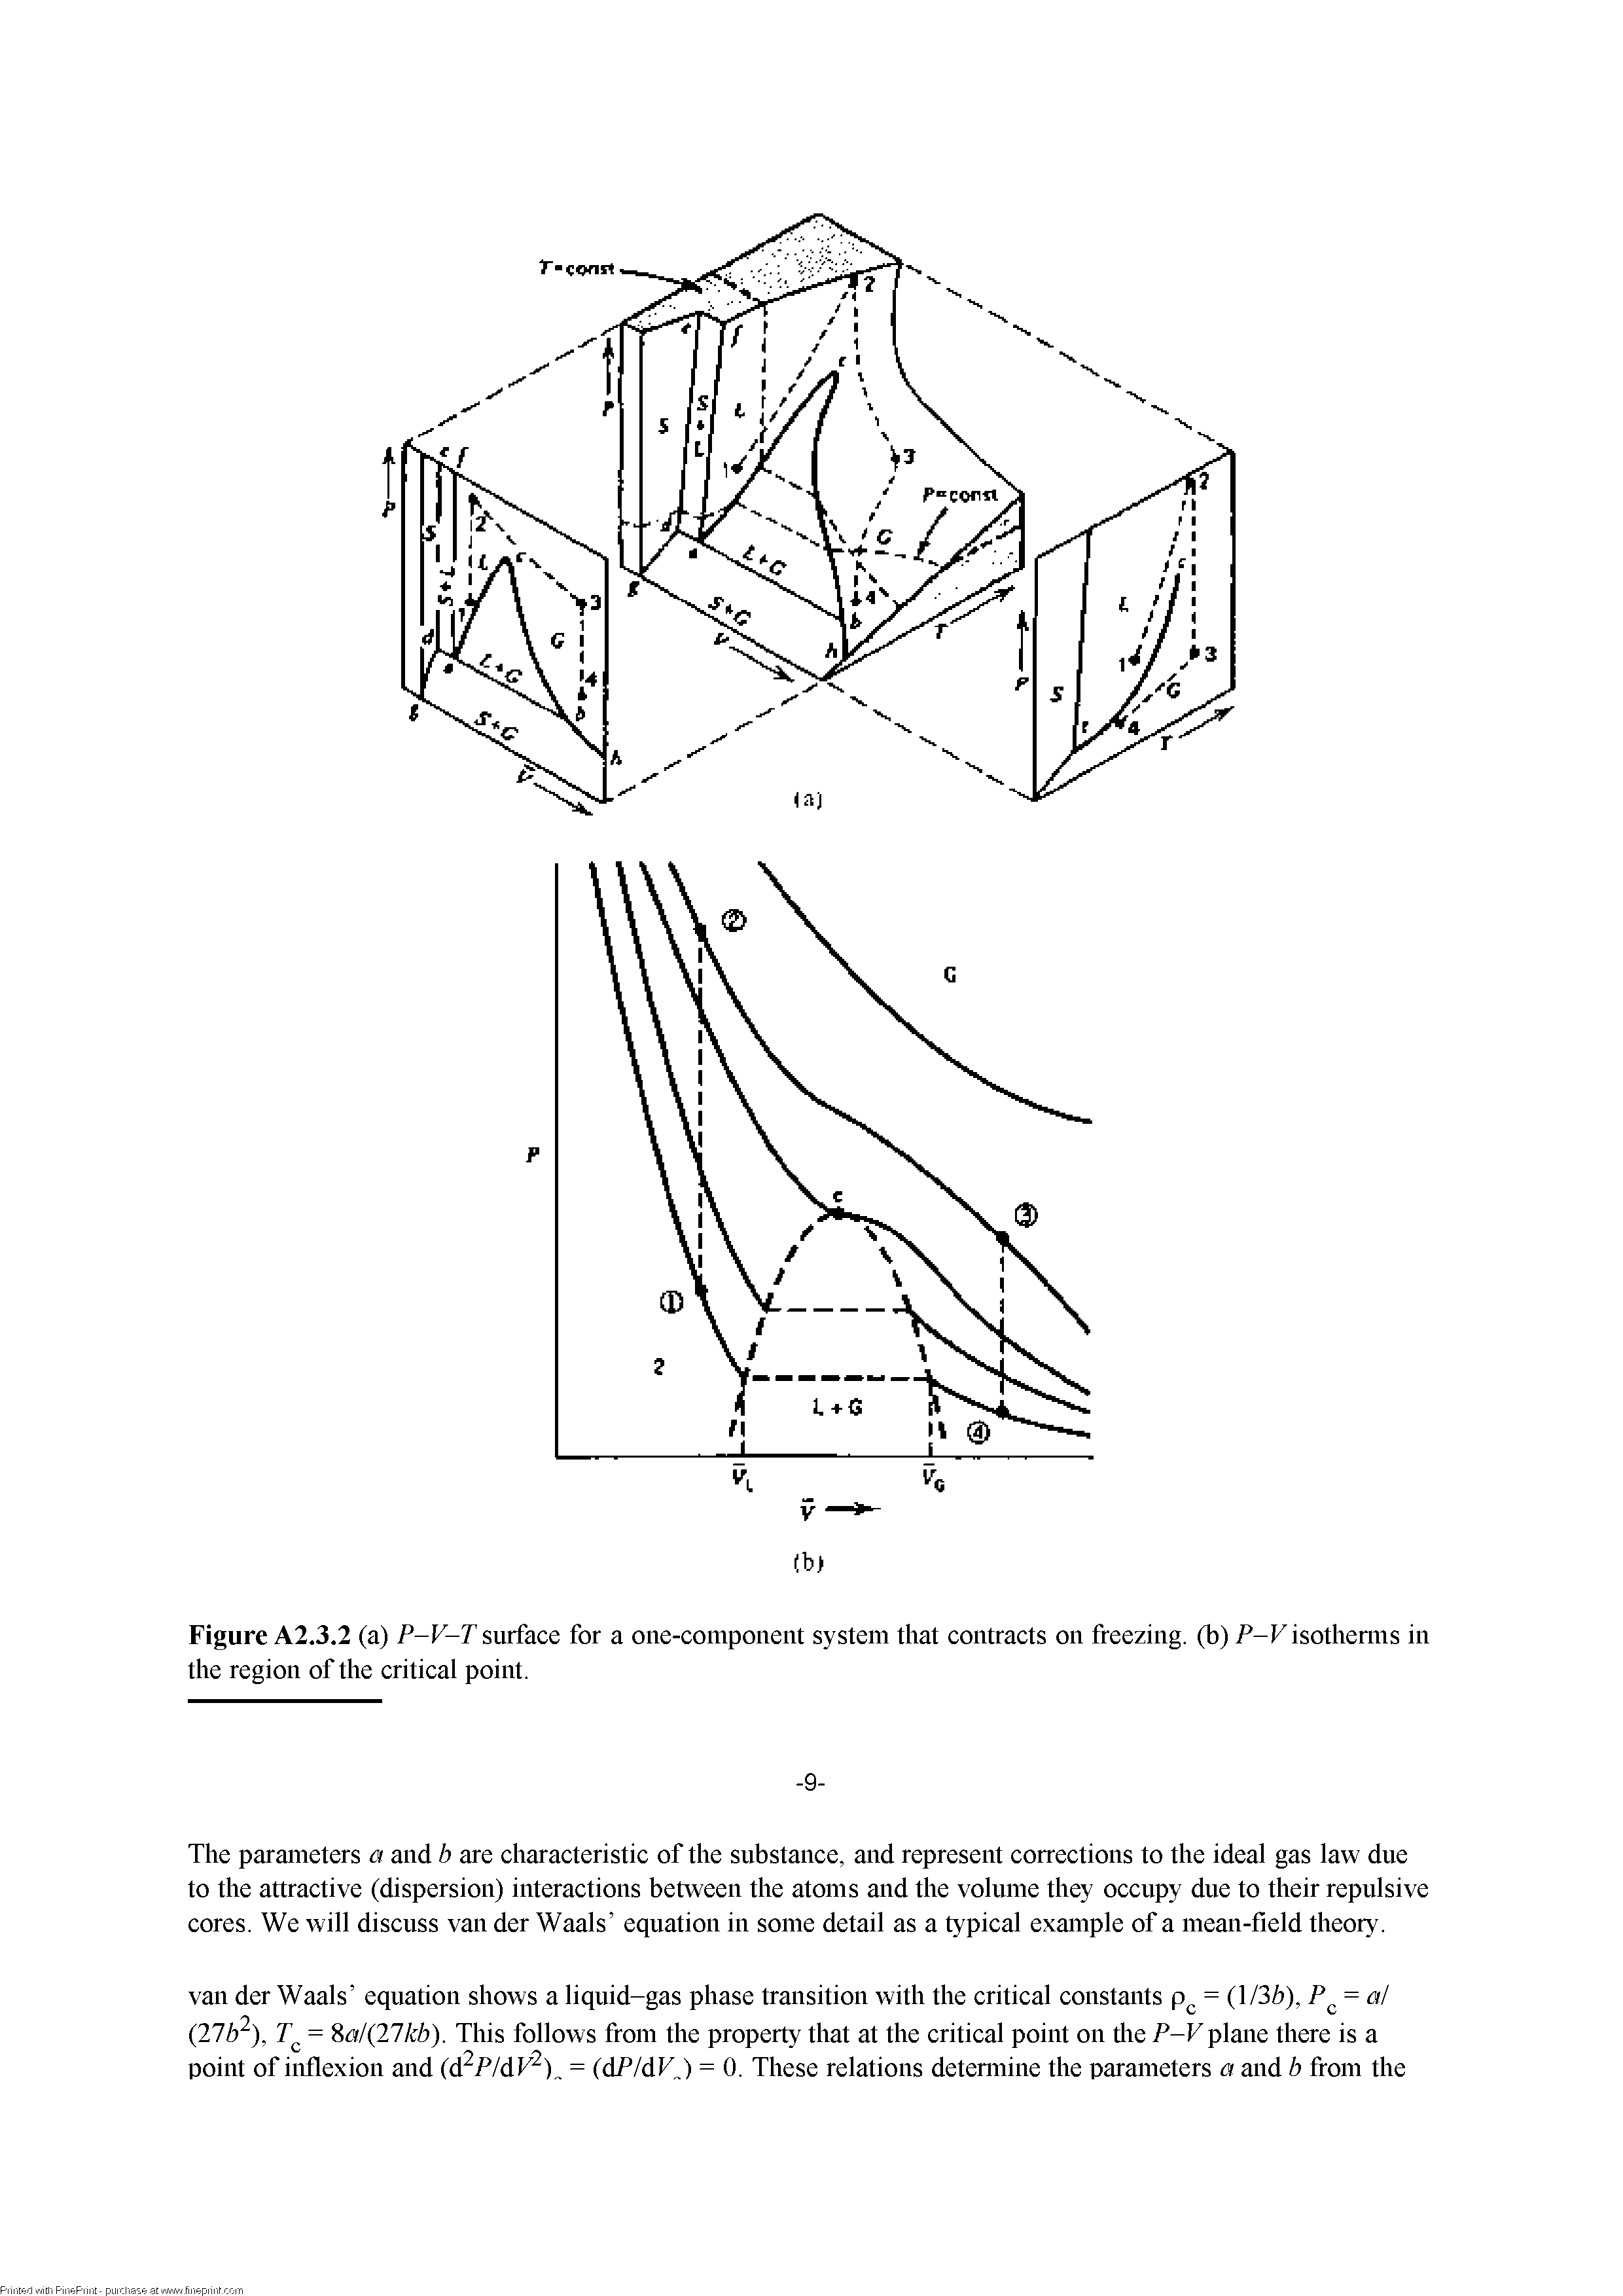 Figure A2.3.2 (a) P-V-T surface for a one-component system that contracts on freezing, (b) P-Visothenns in the region of the critical point.